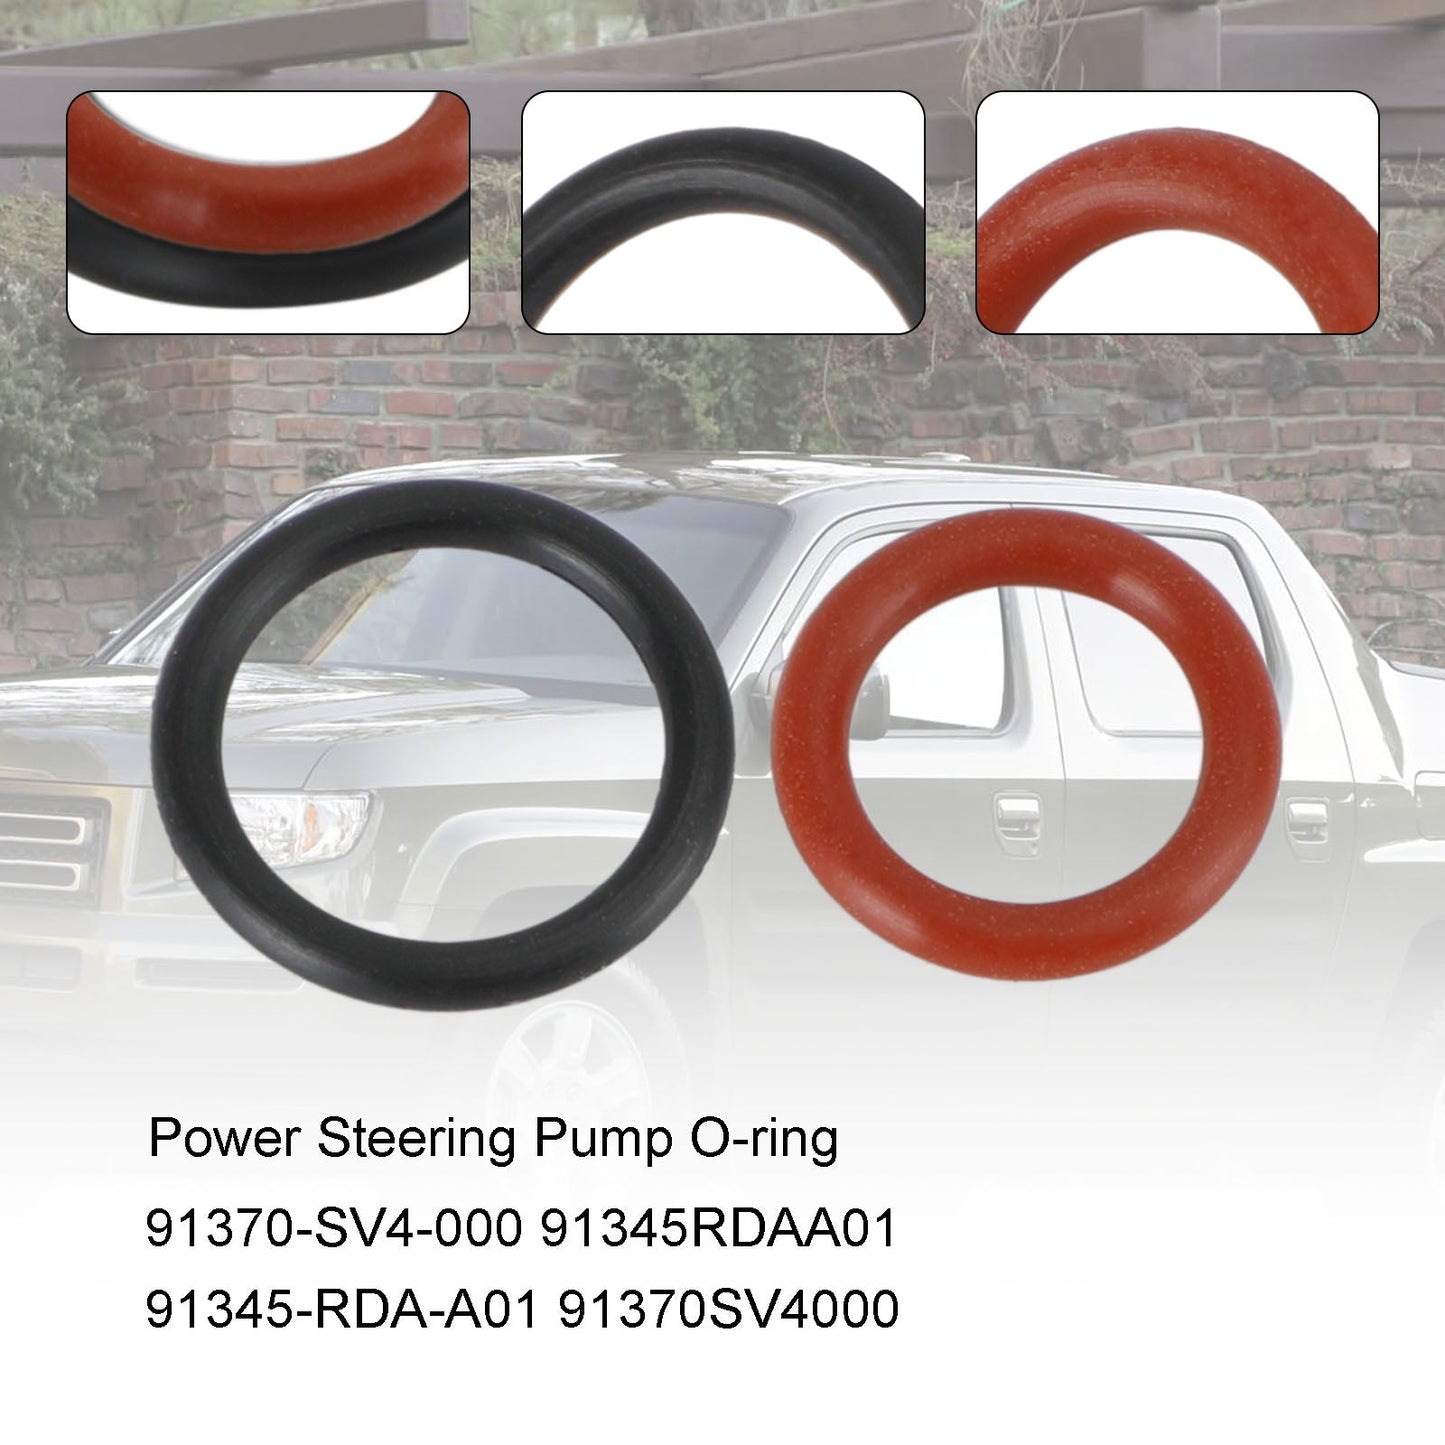 2PCS Power Steering Pump Rubber Inlet & Outlet O-Ring Seals Fit Acura Fit Honda